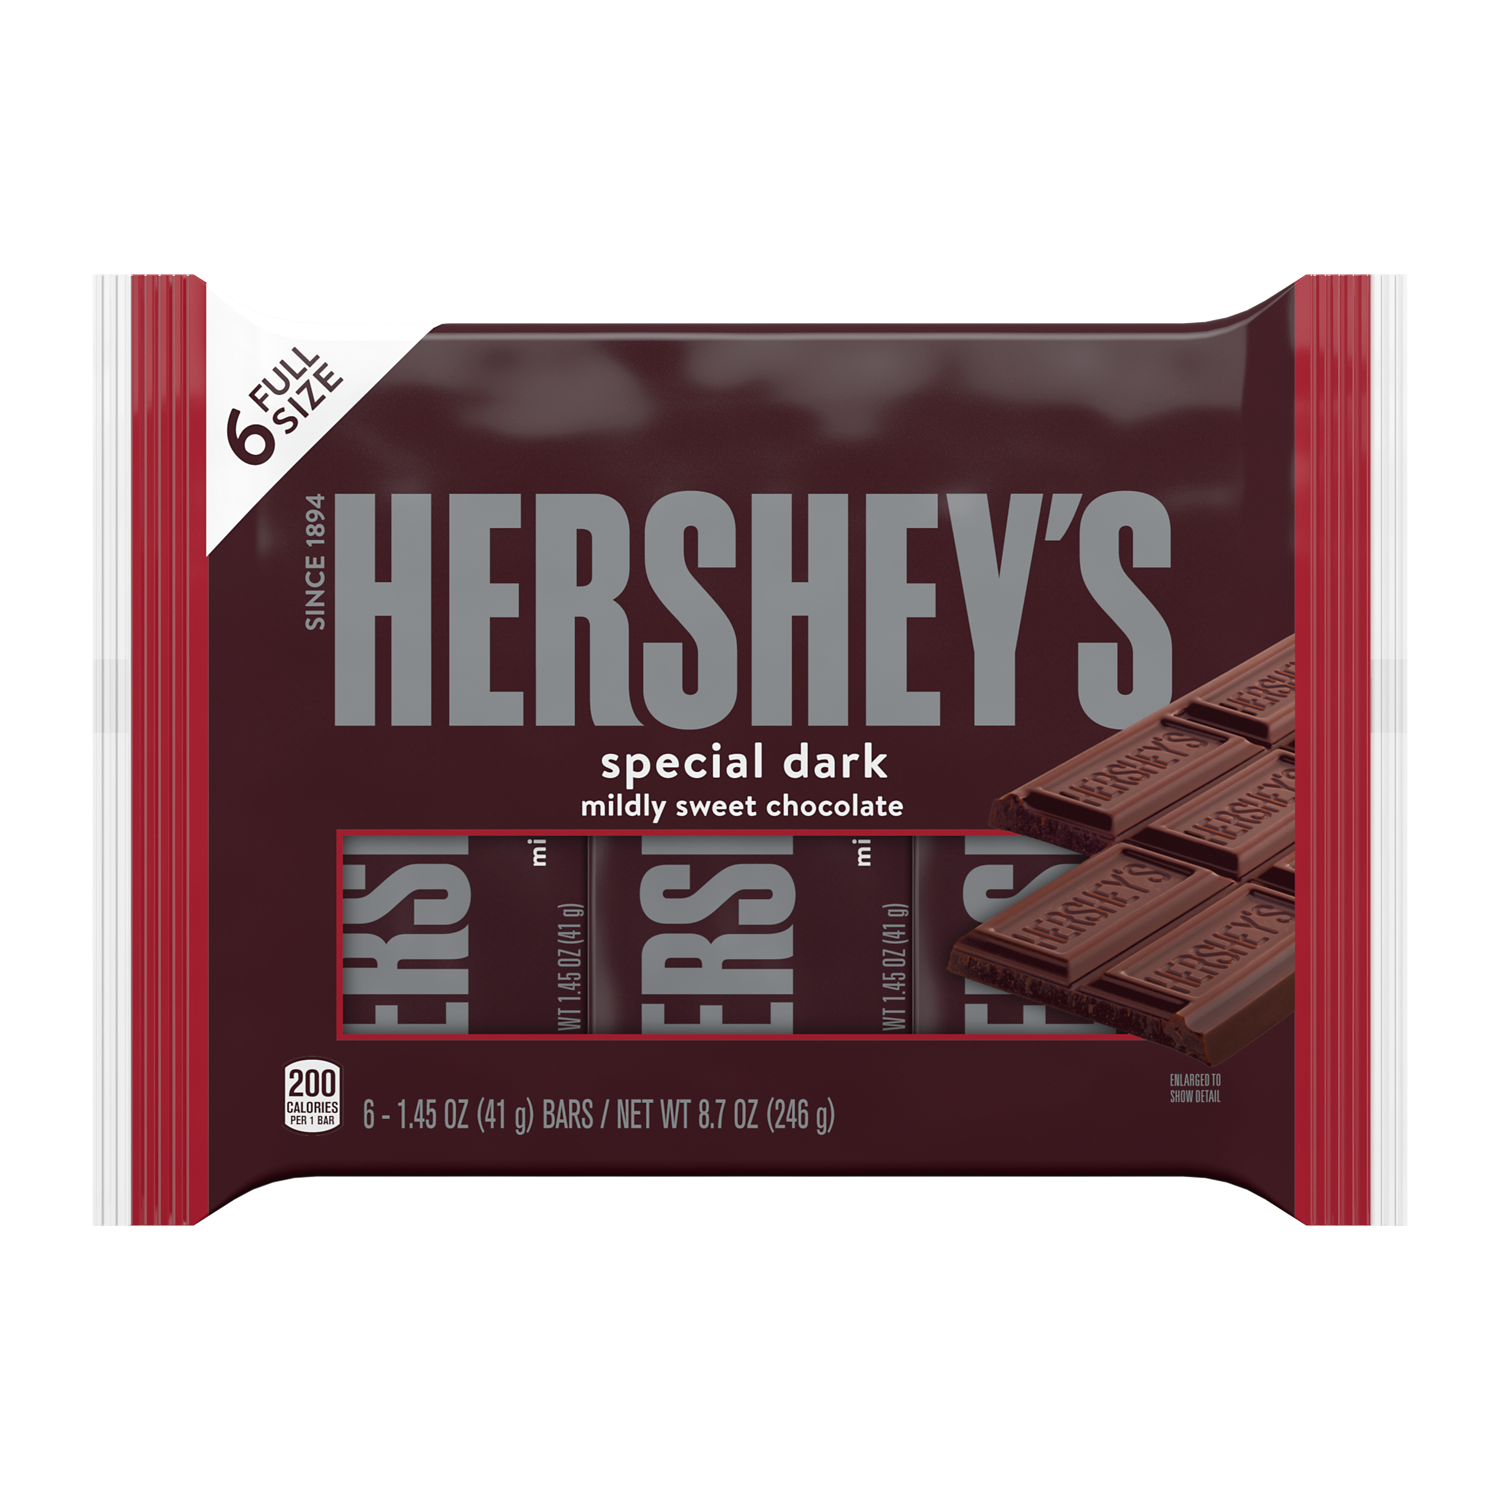 HERSHEY'S SPECIAL DARK Mildly Sweet Chocolate Candy Bars, 8.7 oz, 6 pack - Front of Package